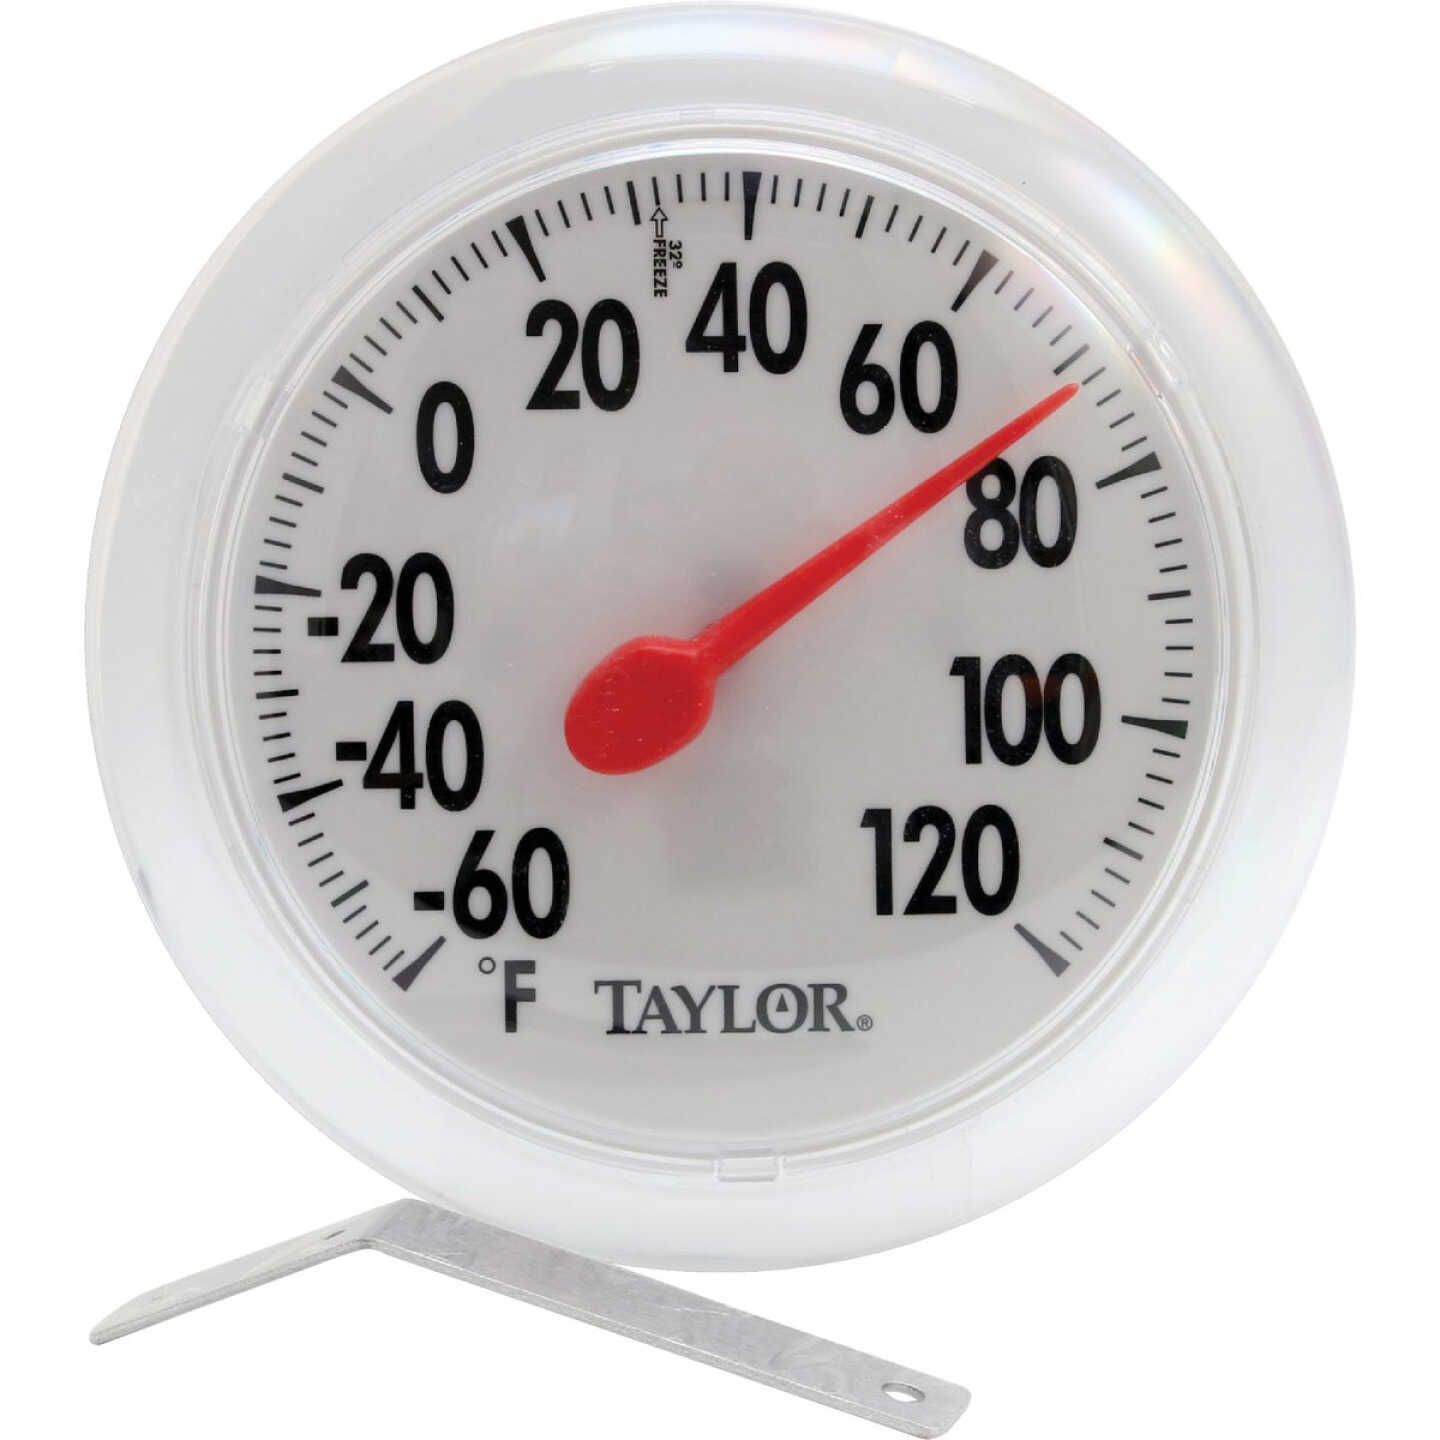 Taylor 6 Fahrenheit -60 To 120 Outdoor Wall Thermometer - Crafty Beaver  Home Center